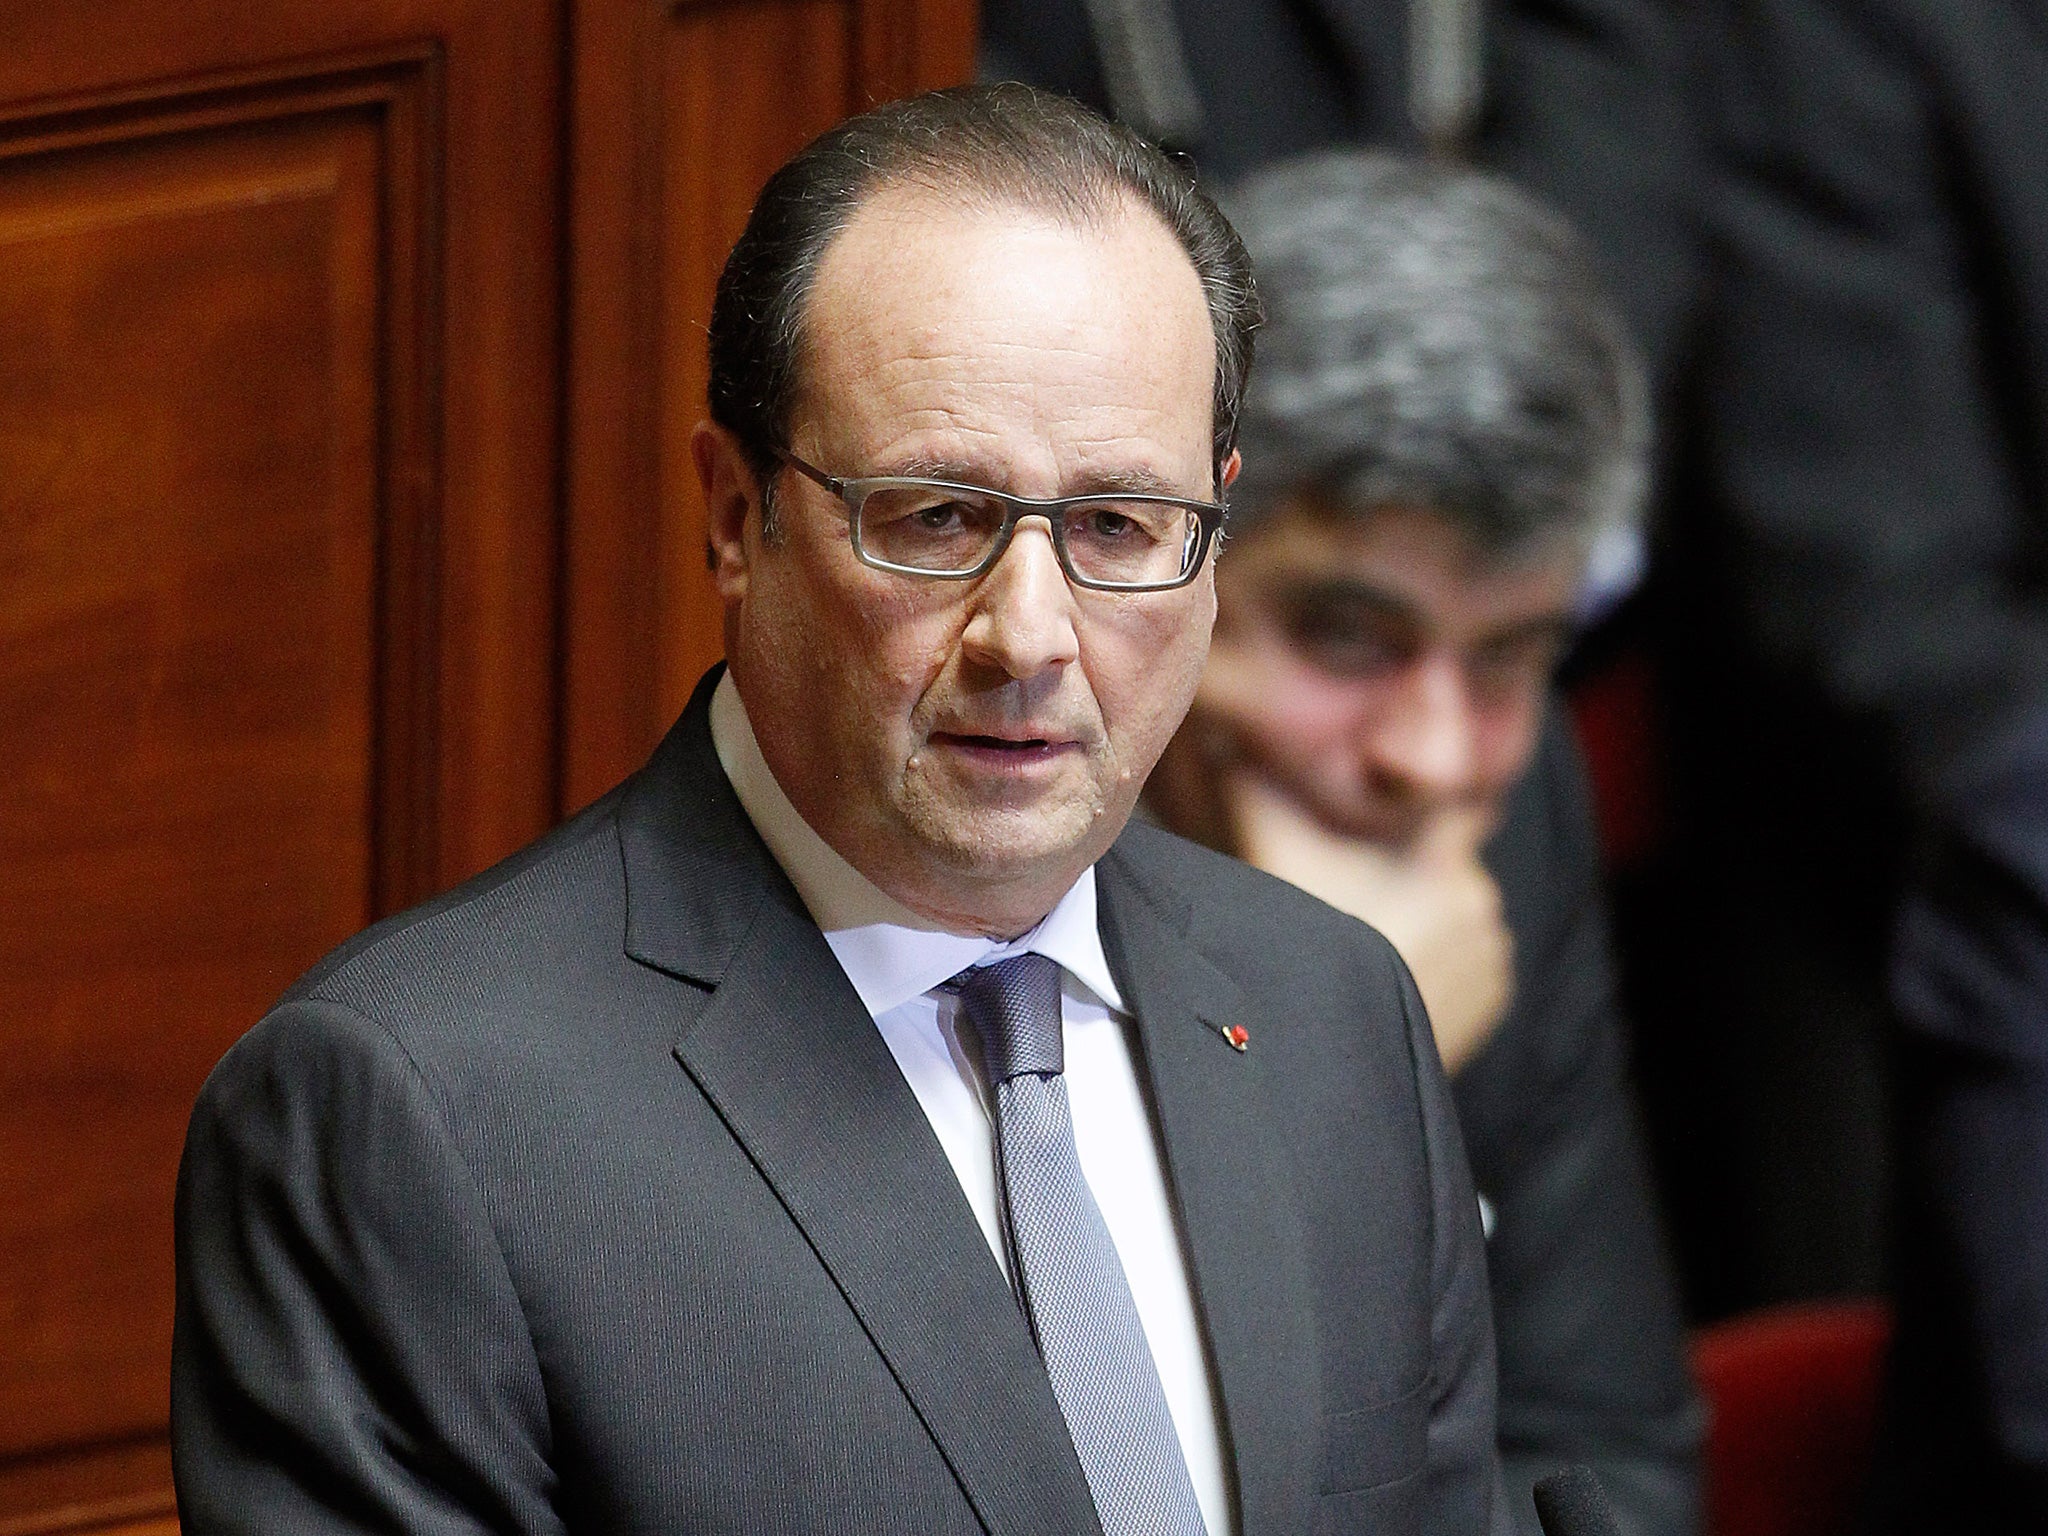 Francois Hollande blamed the opposition for the failure to change the constitution but members of his own party objected to the move